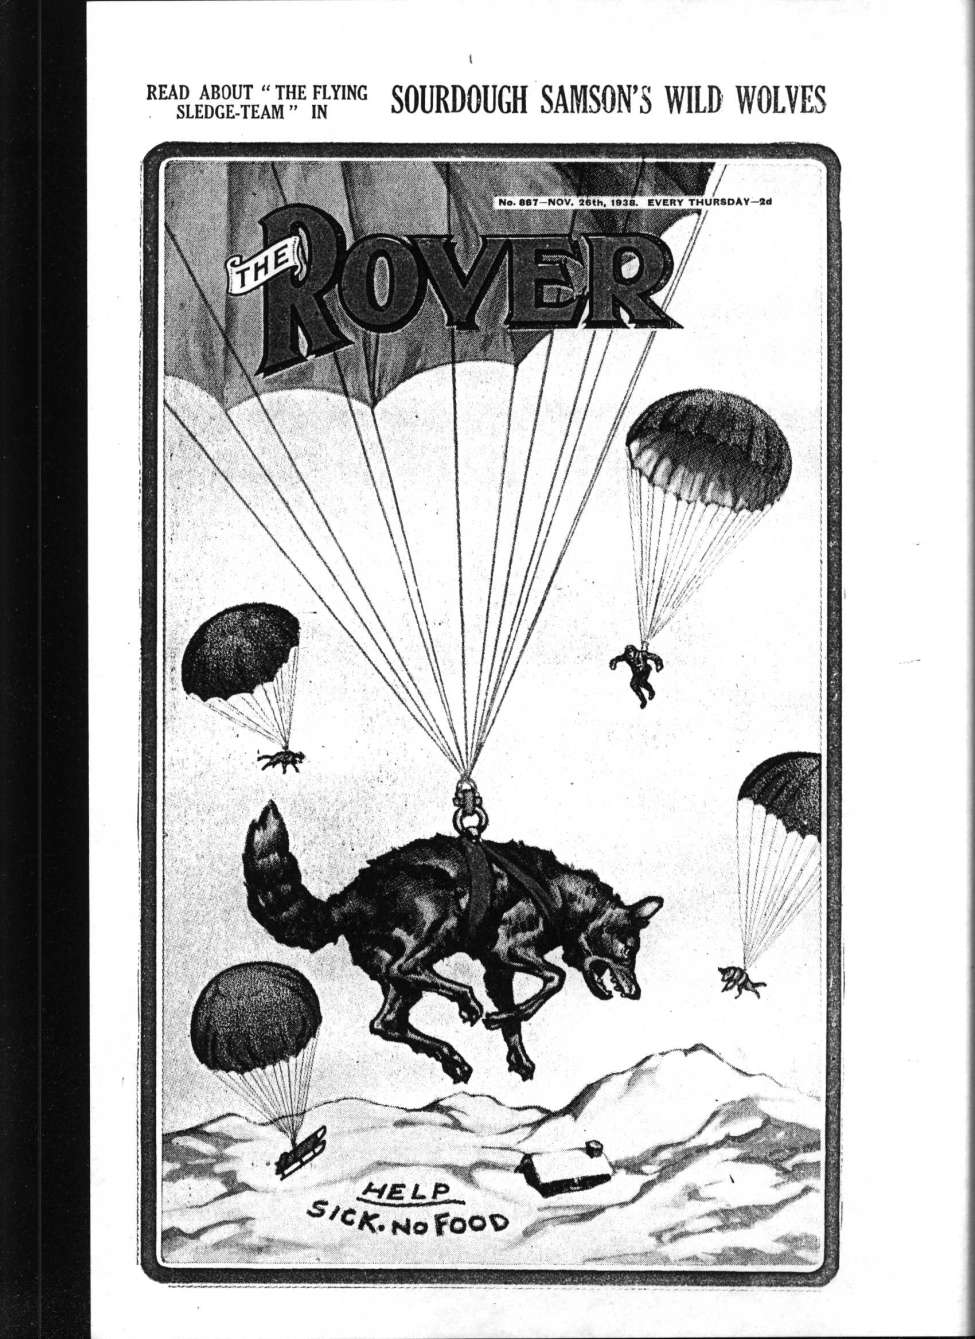 Book Cover For The Rover 867